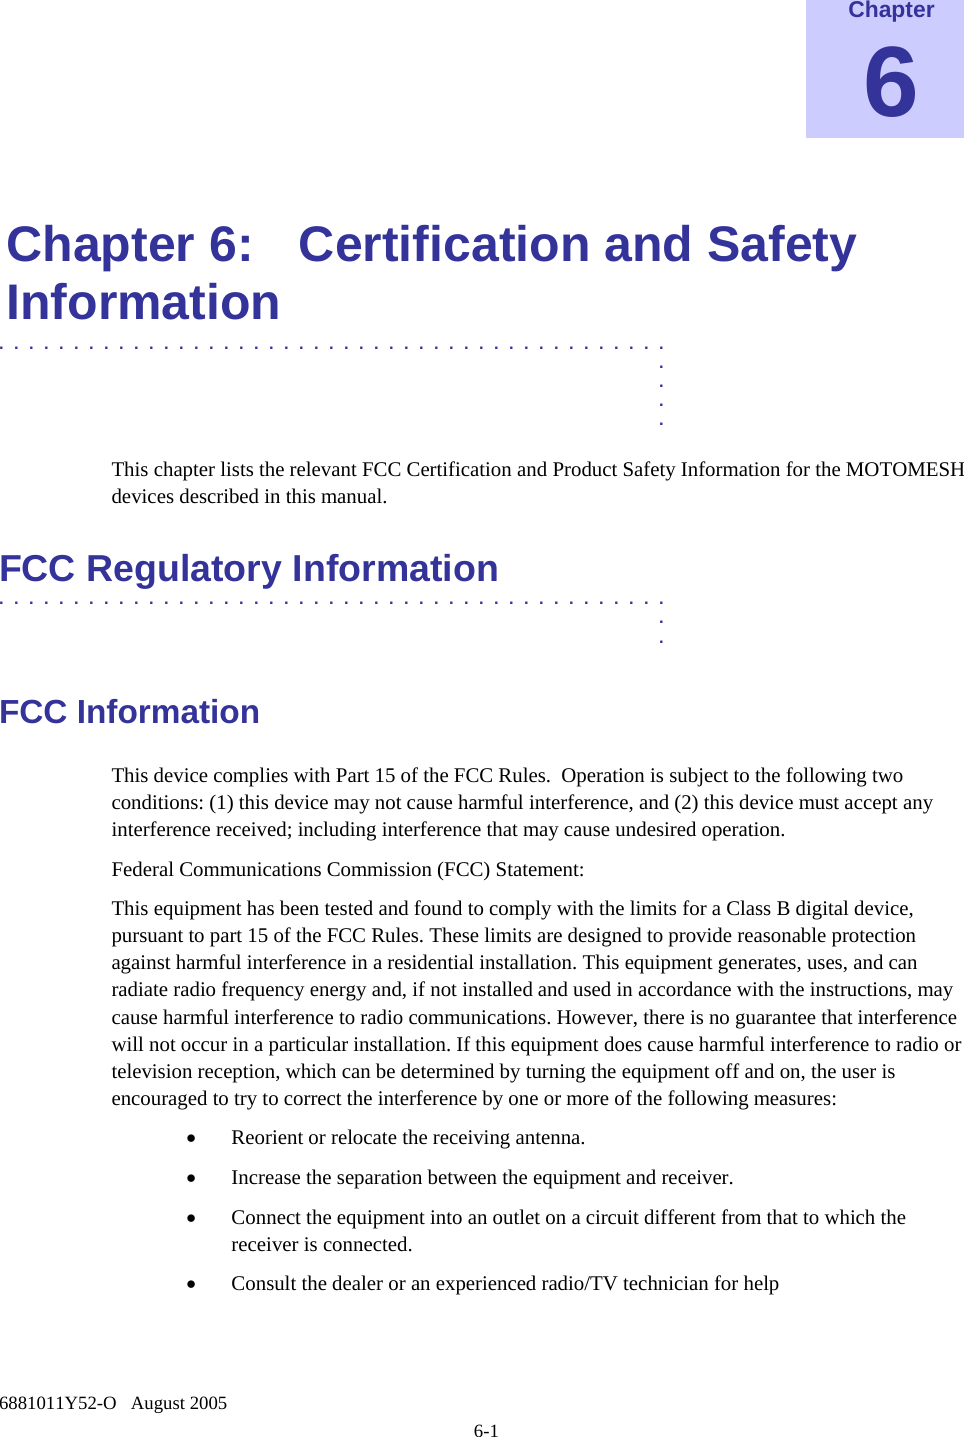  6881011Y52-O   August 2005 6-1 Chapter 6  Chapter 6:  Certification and Safety Information .............................................  .  .  .  . This chapter lists the relevant FCC Certification and Product Safety Information for the MOTOMESH devices described in this manual. FCC Regulatory Information .............................................  .  . FCC Information This device complies with Part 15 of the FCC Rules.  Operation is subject to the following two conditions: (1) this device may not cause harmful interference, and (2) this device must accept any interference received; including interference that may cause undesired operation. Federal Communications Commission (FCC) Statement: This equipment has been tested and found to comply with the limits for a Class B digital device, pursuant to part 15 of the FCC Rules. These limits are designed to provide reasonable protection against harmful interference in a residential installation. This equipment generates, uses, and can radiate radio frequency energy and, if not installed and used in accordance with the instructions, may cause harmful interference to radio communications. However, there is no guarantee that interference will not occur in a particular installation. If this equipment does cause harmful interference to radio or television reception, which can be determined by turning the equipment off and on, the user is encouraged to try to correct the interference by one or more of the following measures:  • Reorient or relocate the receiving antenna. • Increase the separation between the equipment and receiver. • Connect the equipment into an outlet on a circuit different from that to which the receiver is connected. • Consult the dealer or an experienced radio/TV technician for help  